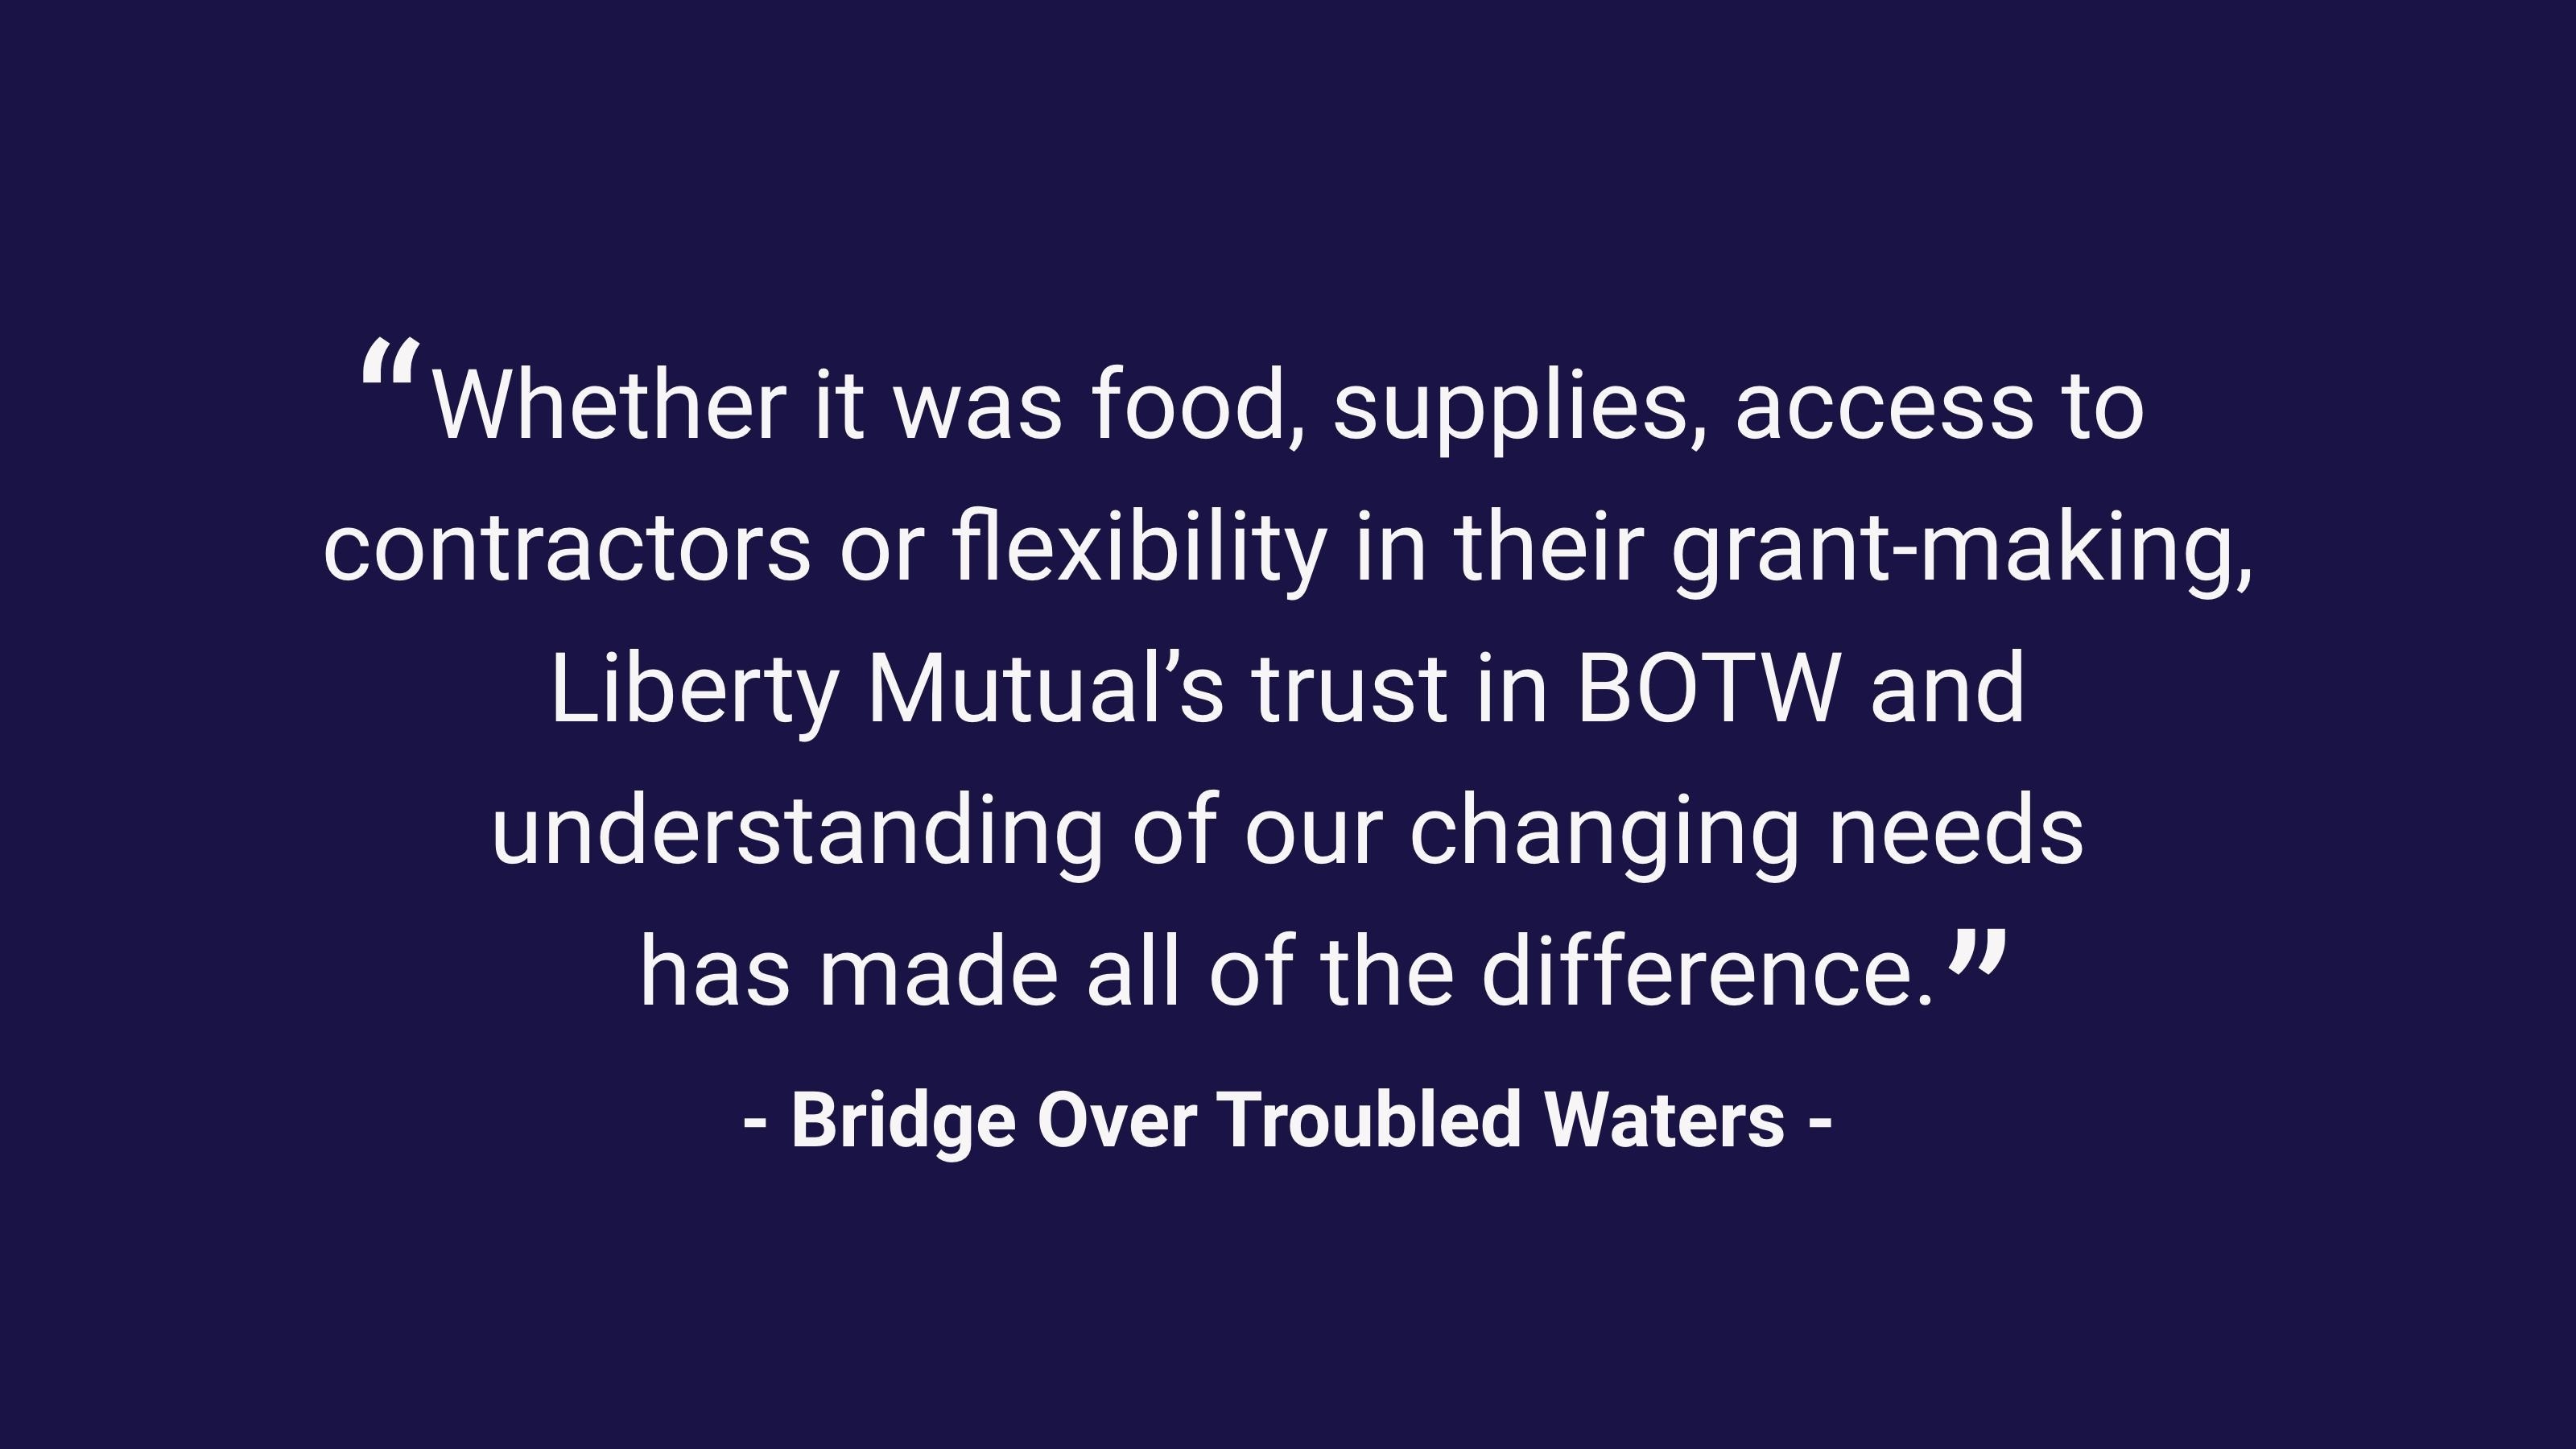 (slide 3 of 3) "Whether it was food, supplies, access to contractors or flexibility in their grant-making, Liberty Mutual's trust in BOTW and understanding of our changing needs has made all of the difference." - Bridge Over Troubled Waters. 